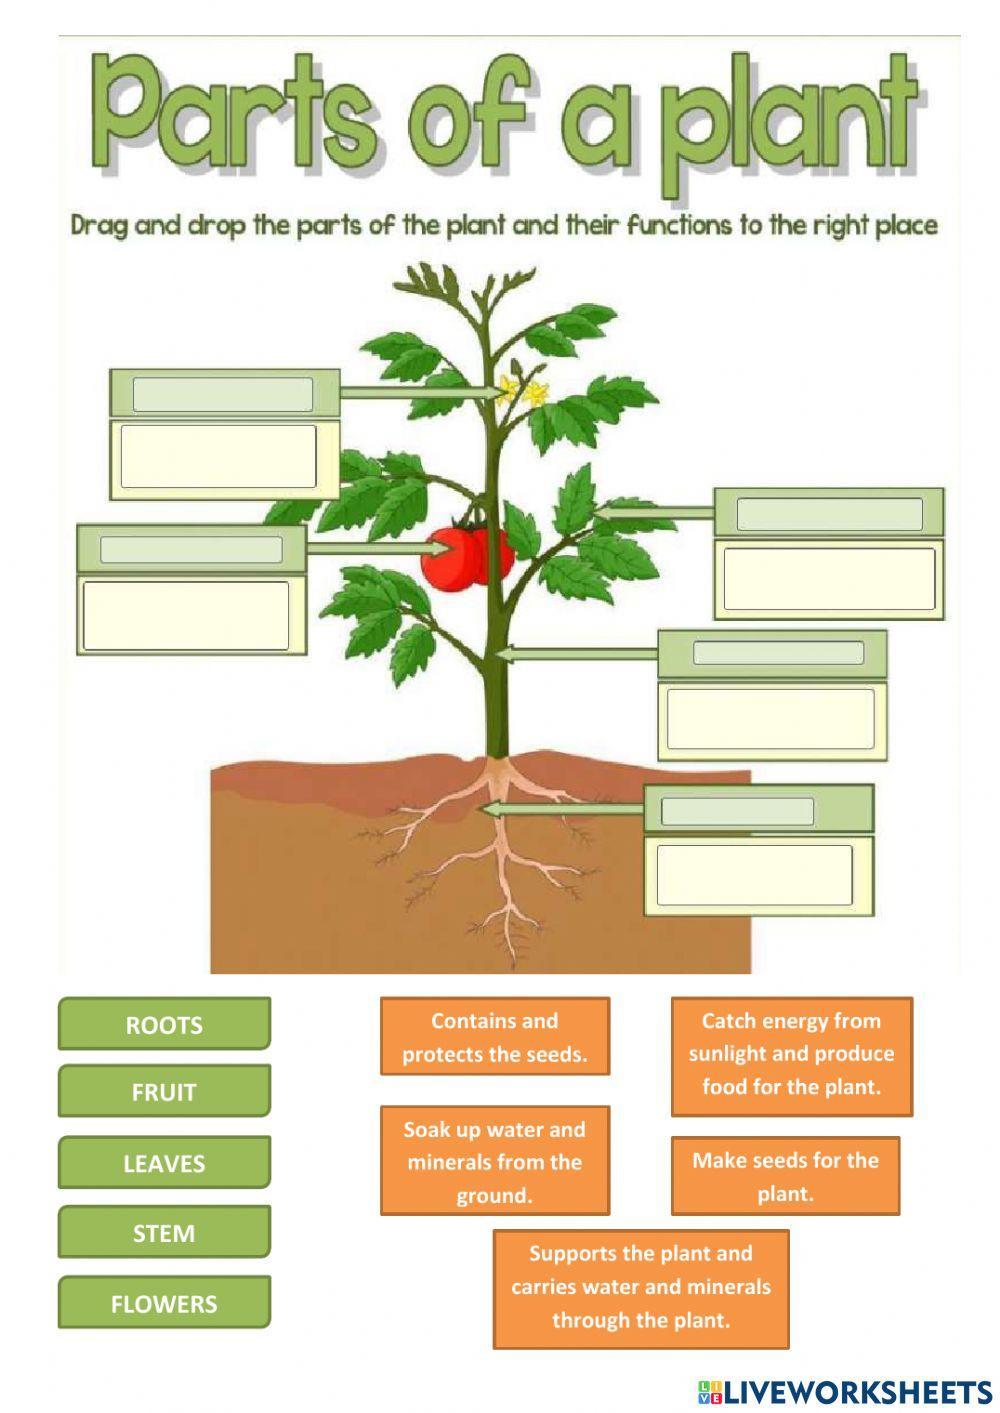 Parts of a plant and functions